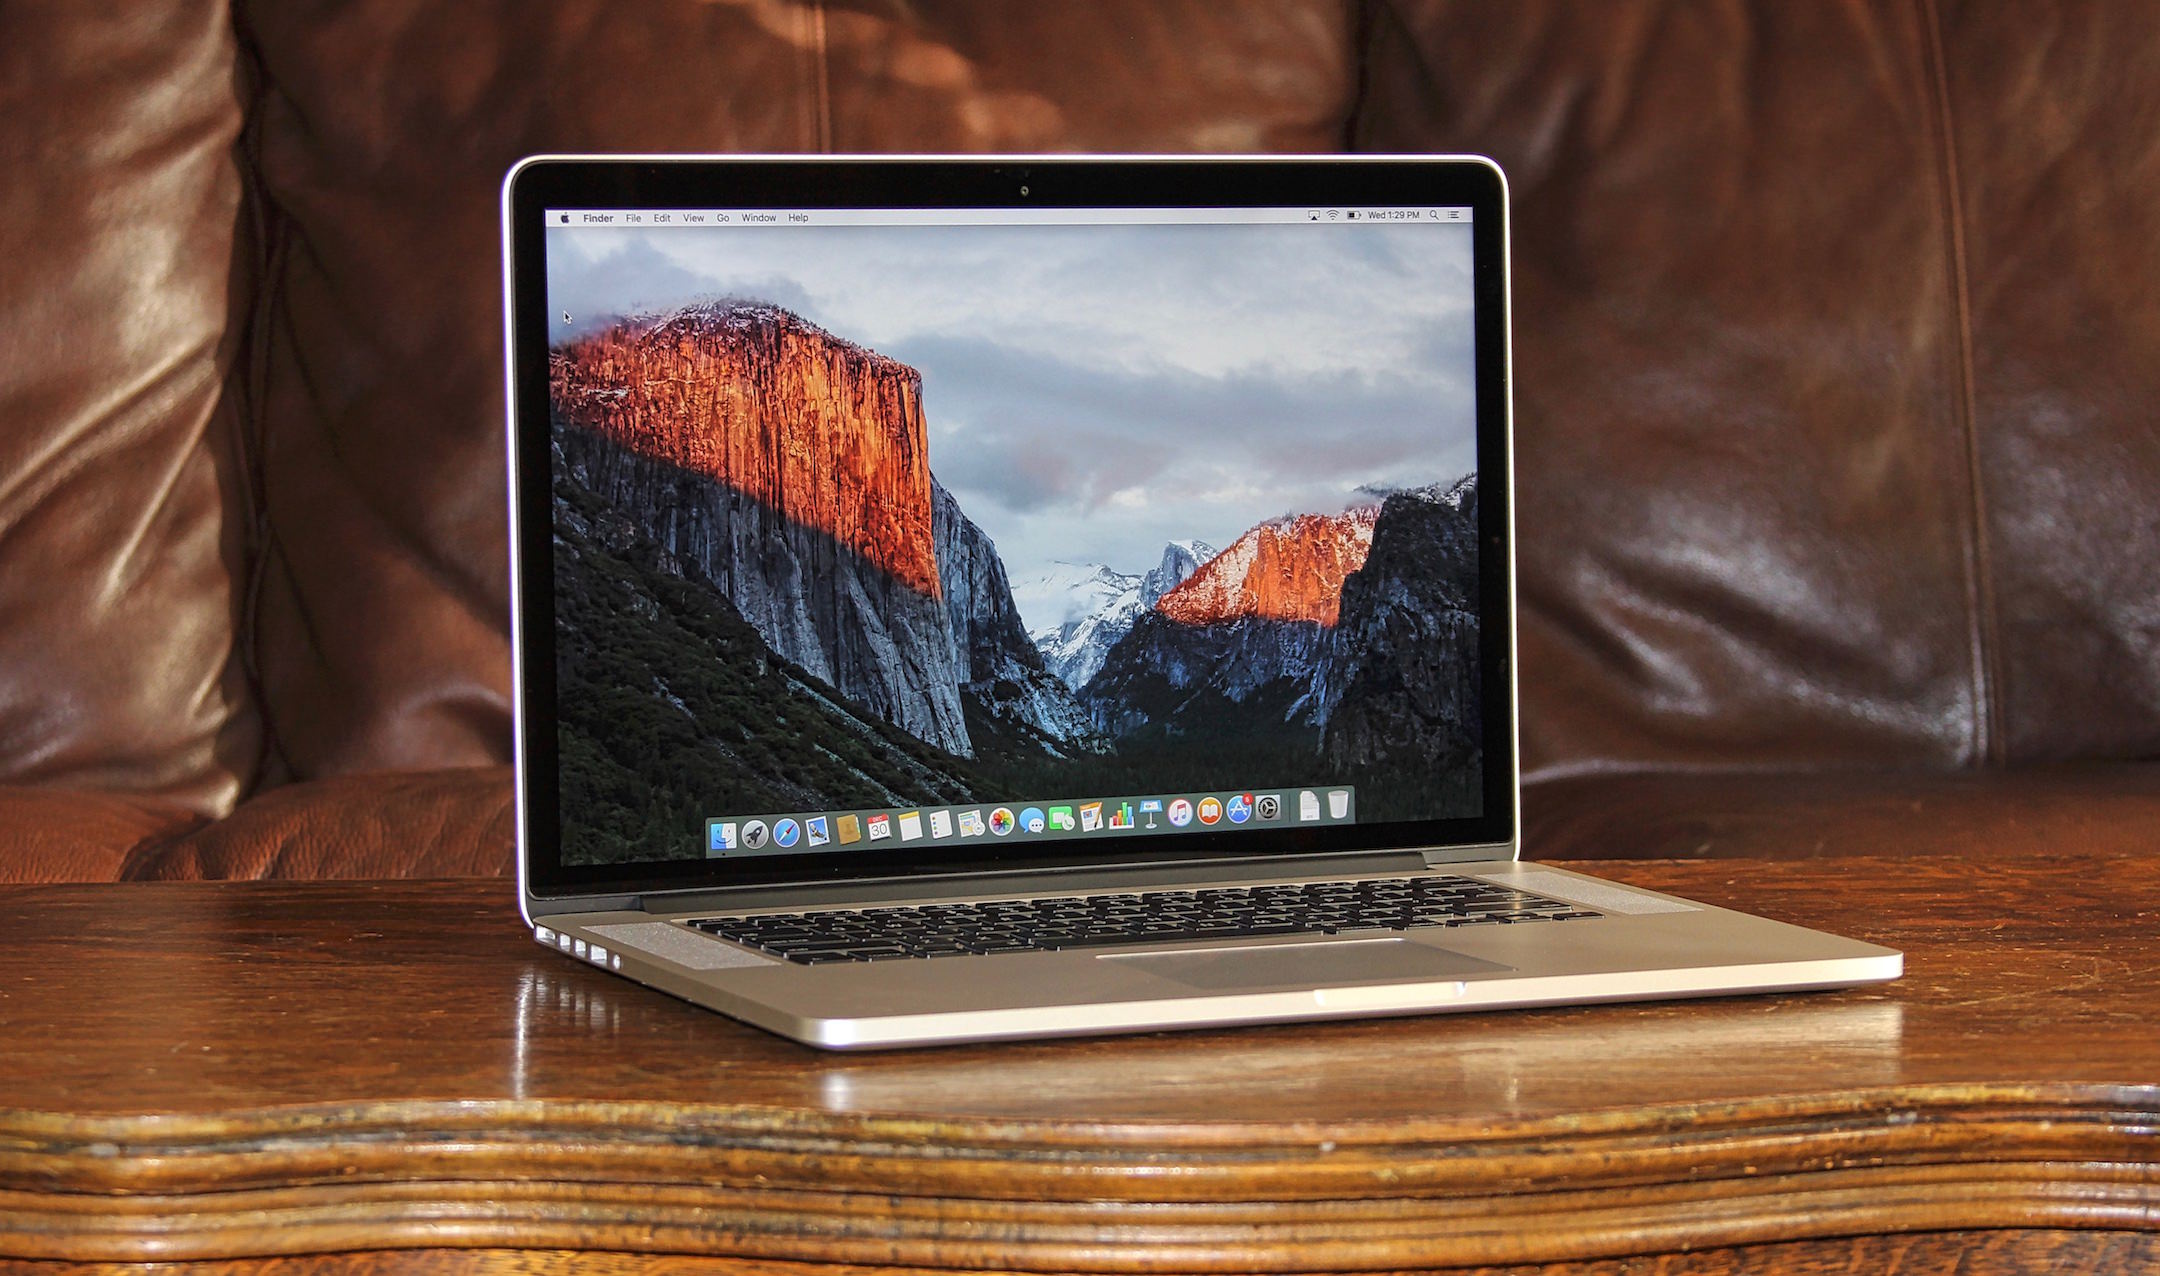 macbook pro with retina display review 15 inch